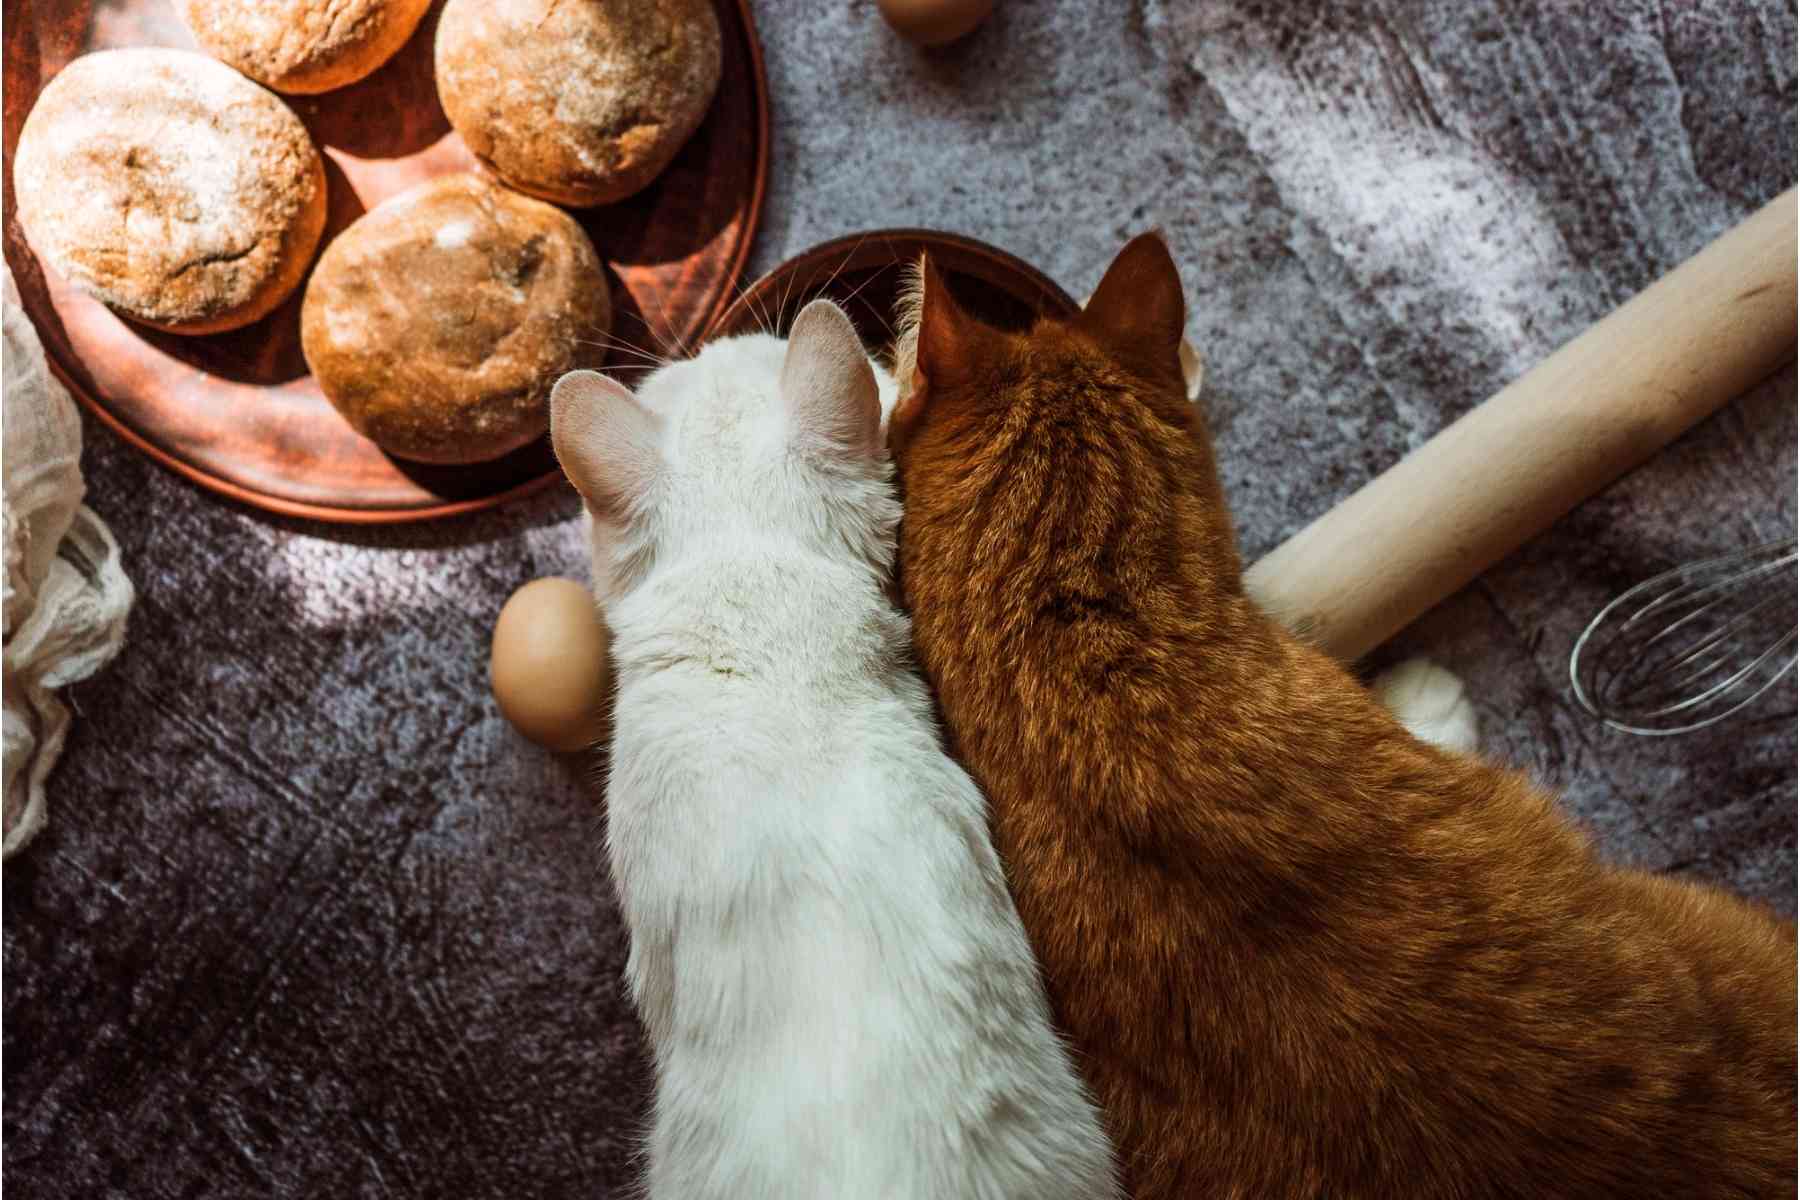 Two cats eating butter from one bowl